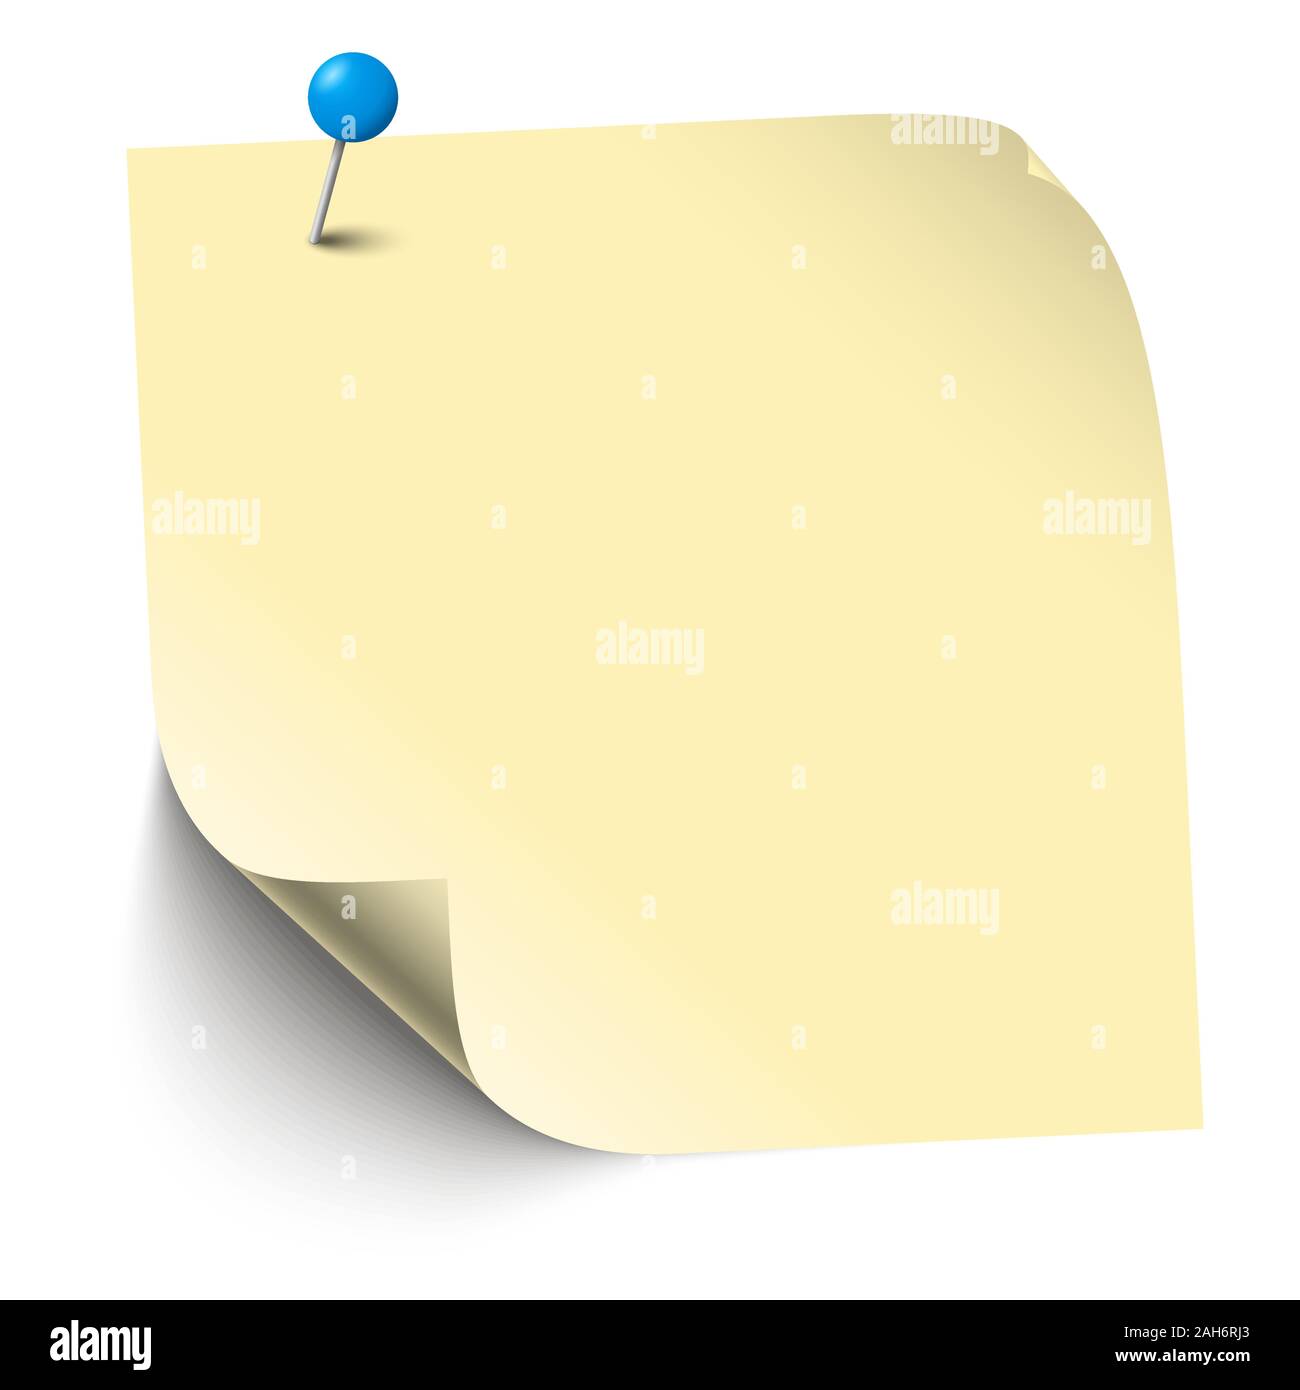 vector illustration of colored sticky note with pin needle Stock Vector